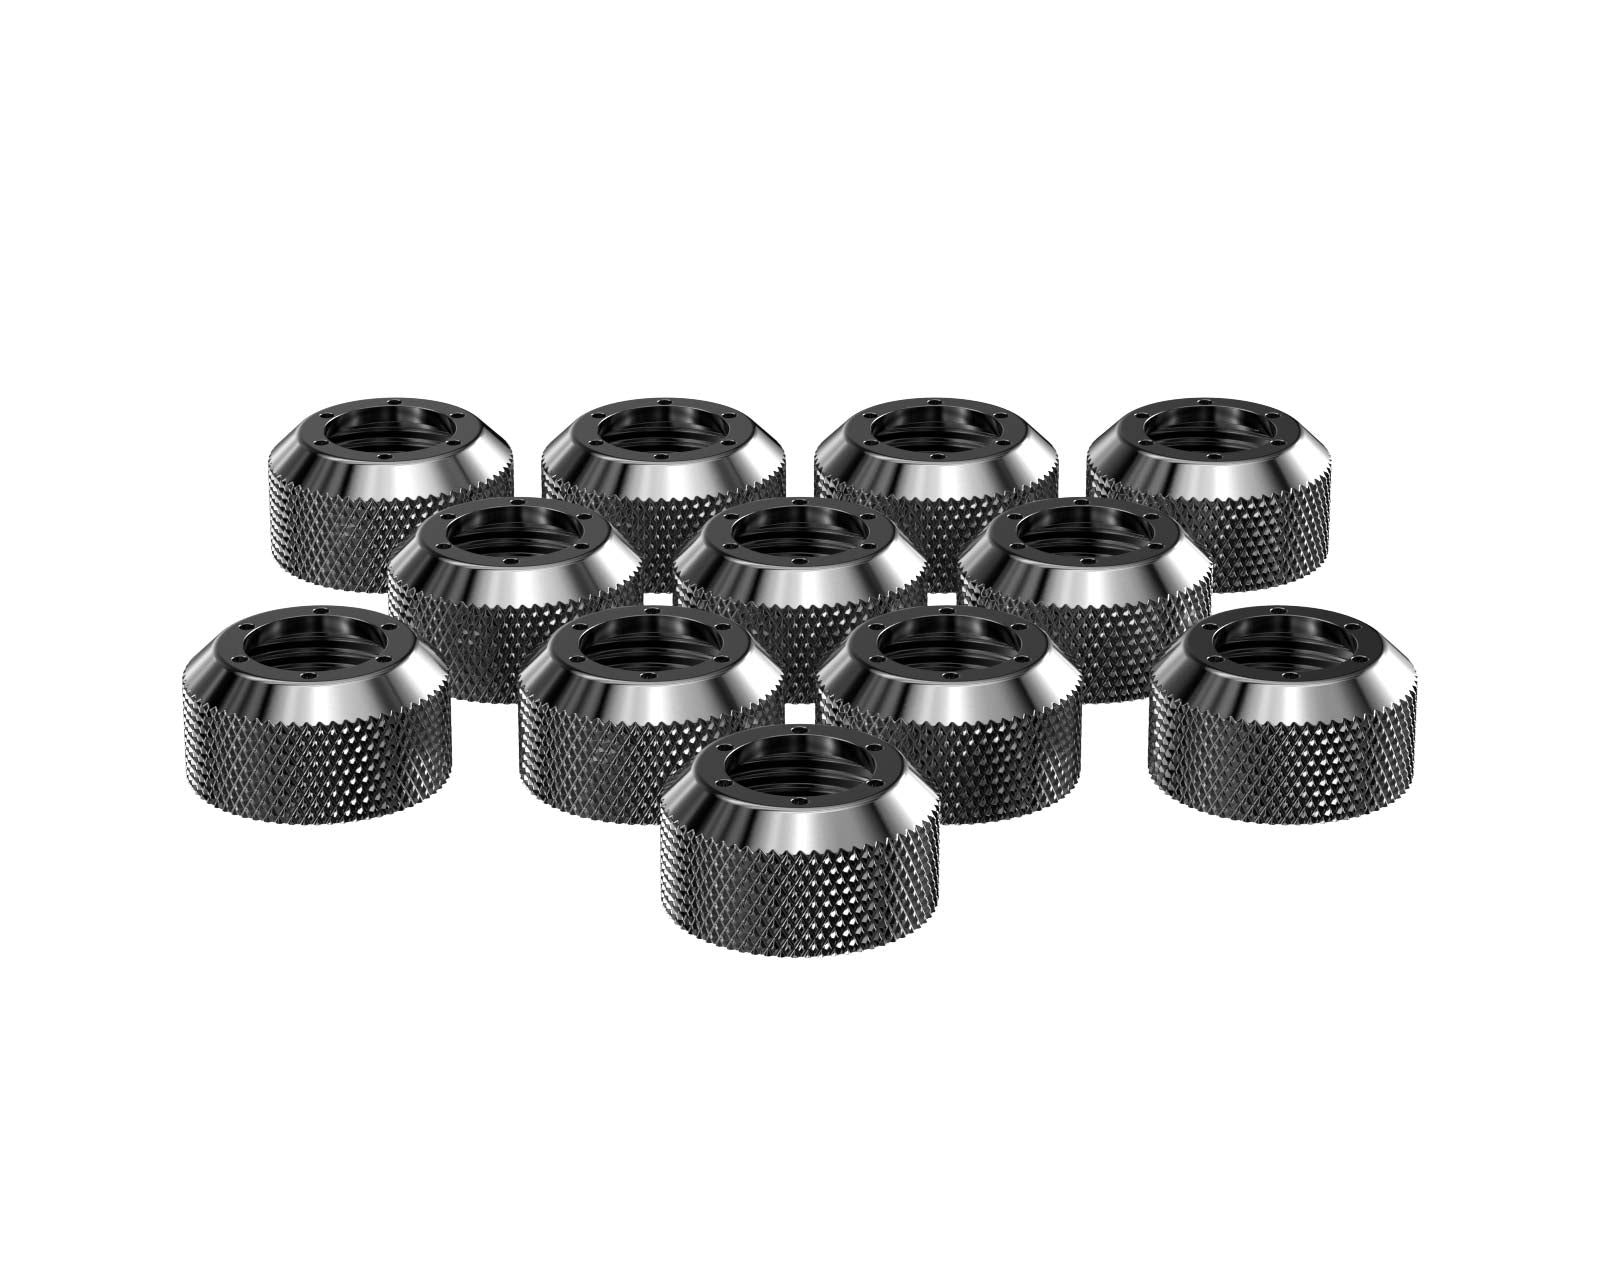 PrimoChill RSX Replacement Cap Switch Over Kit - 1/2in. - PrimoChill - KEEPING IT COOL Dark Nickel